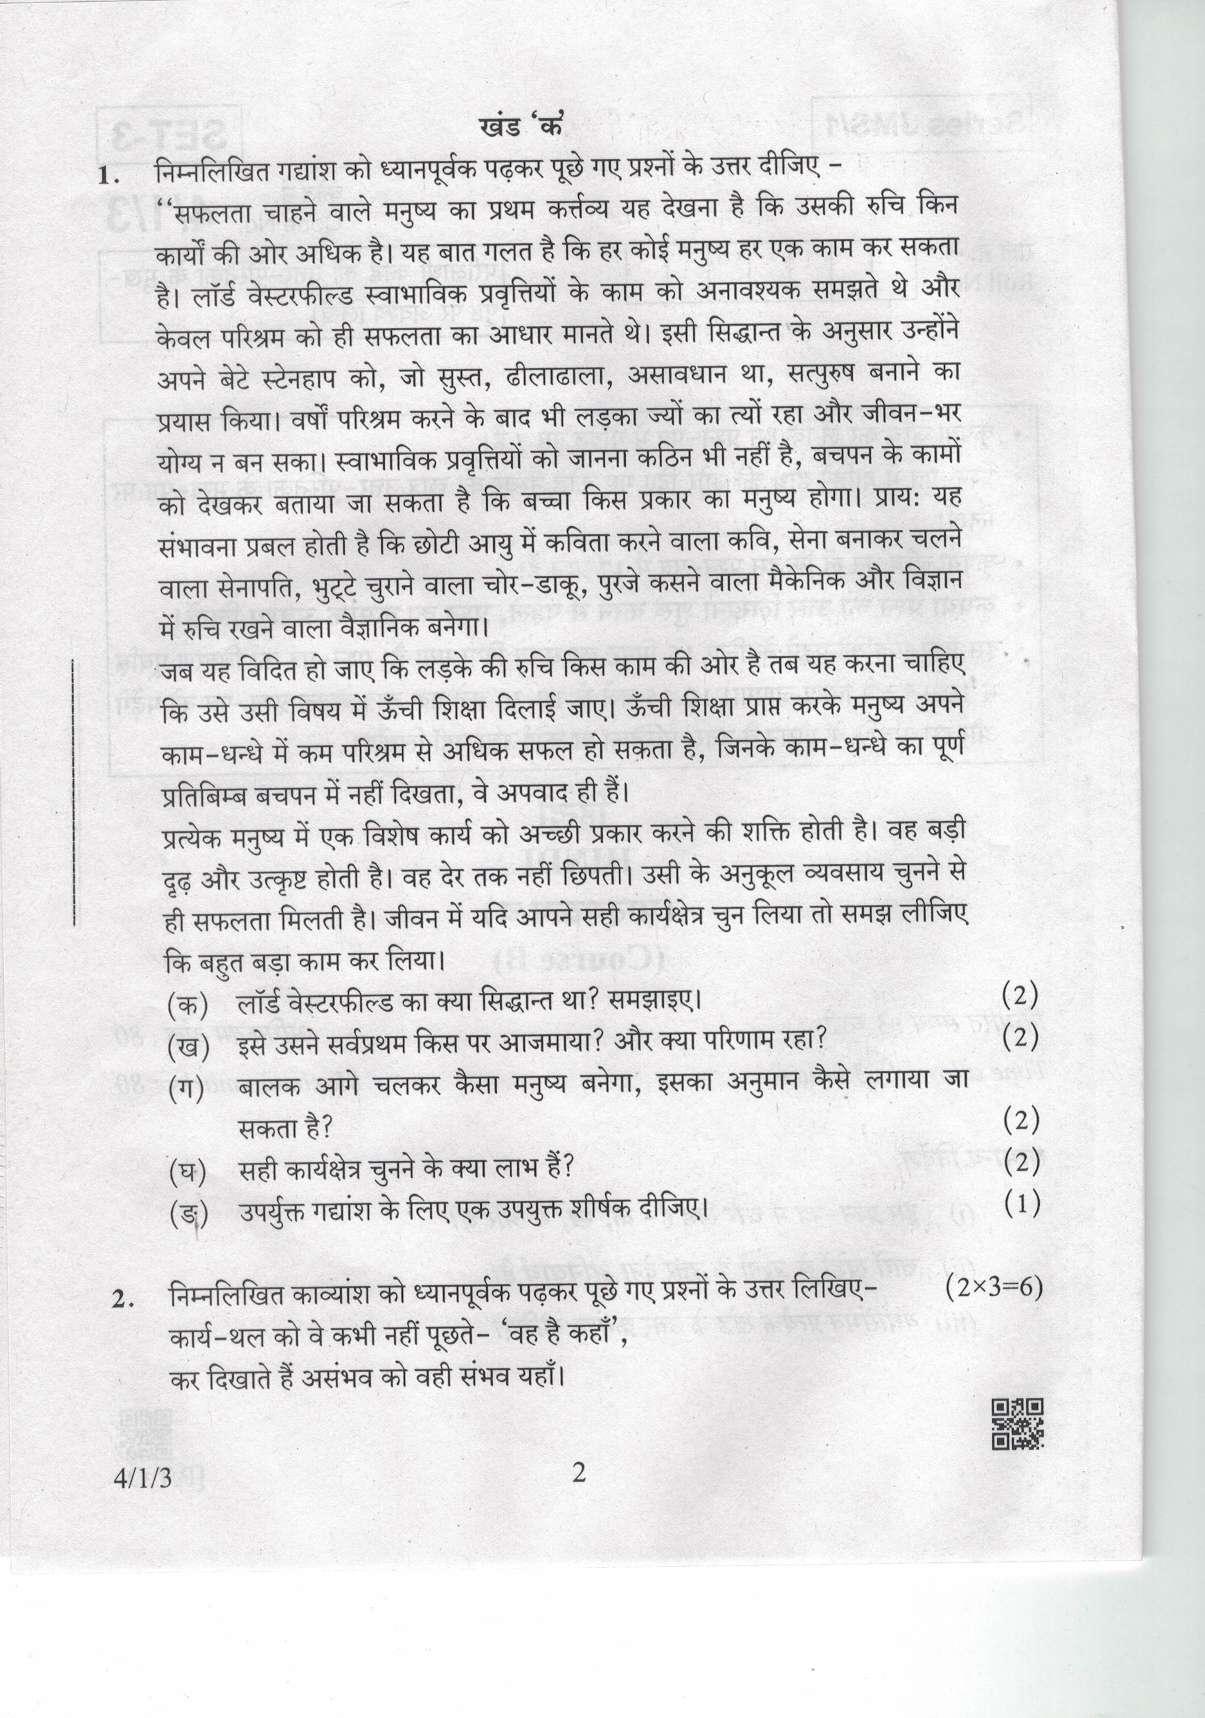 CBSE Class 10 4-1-3 Hindi-B 2019 Question Paper - Page 2